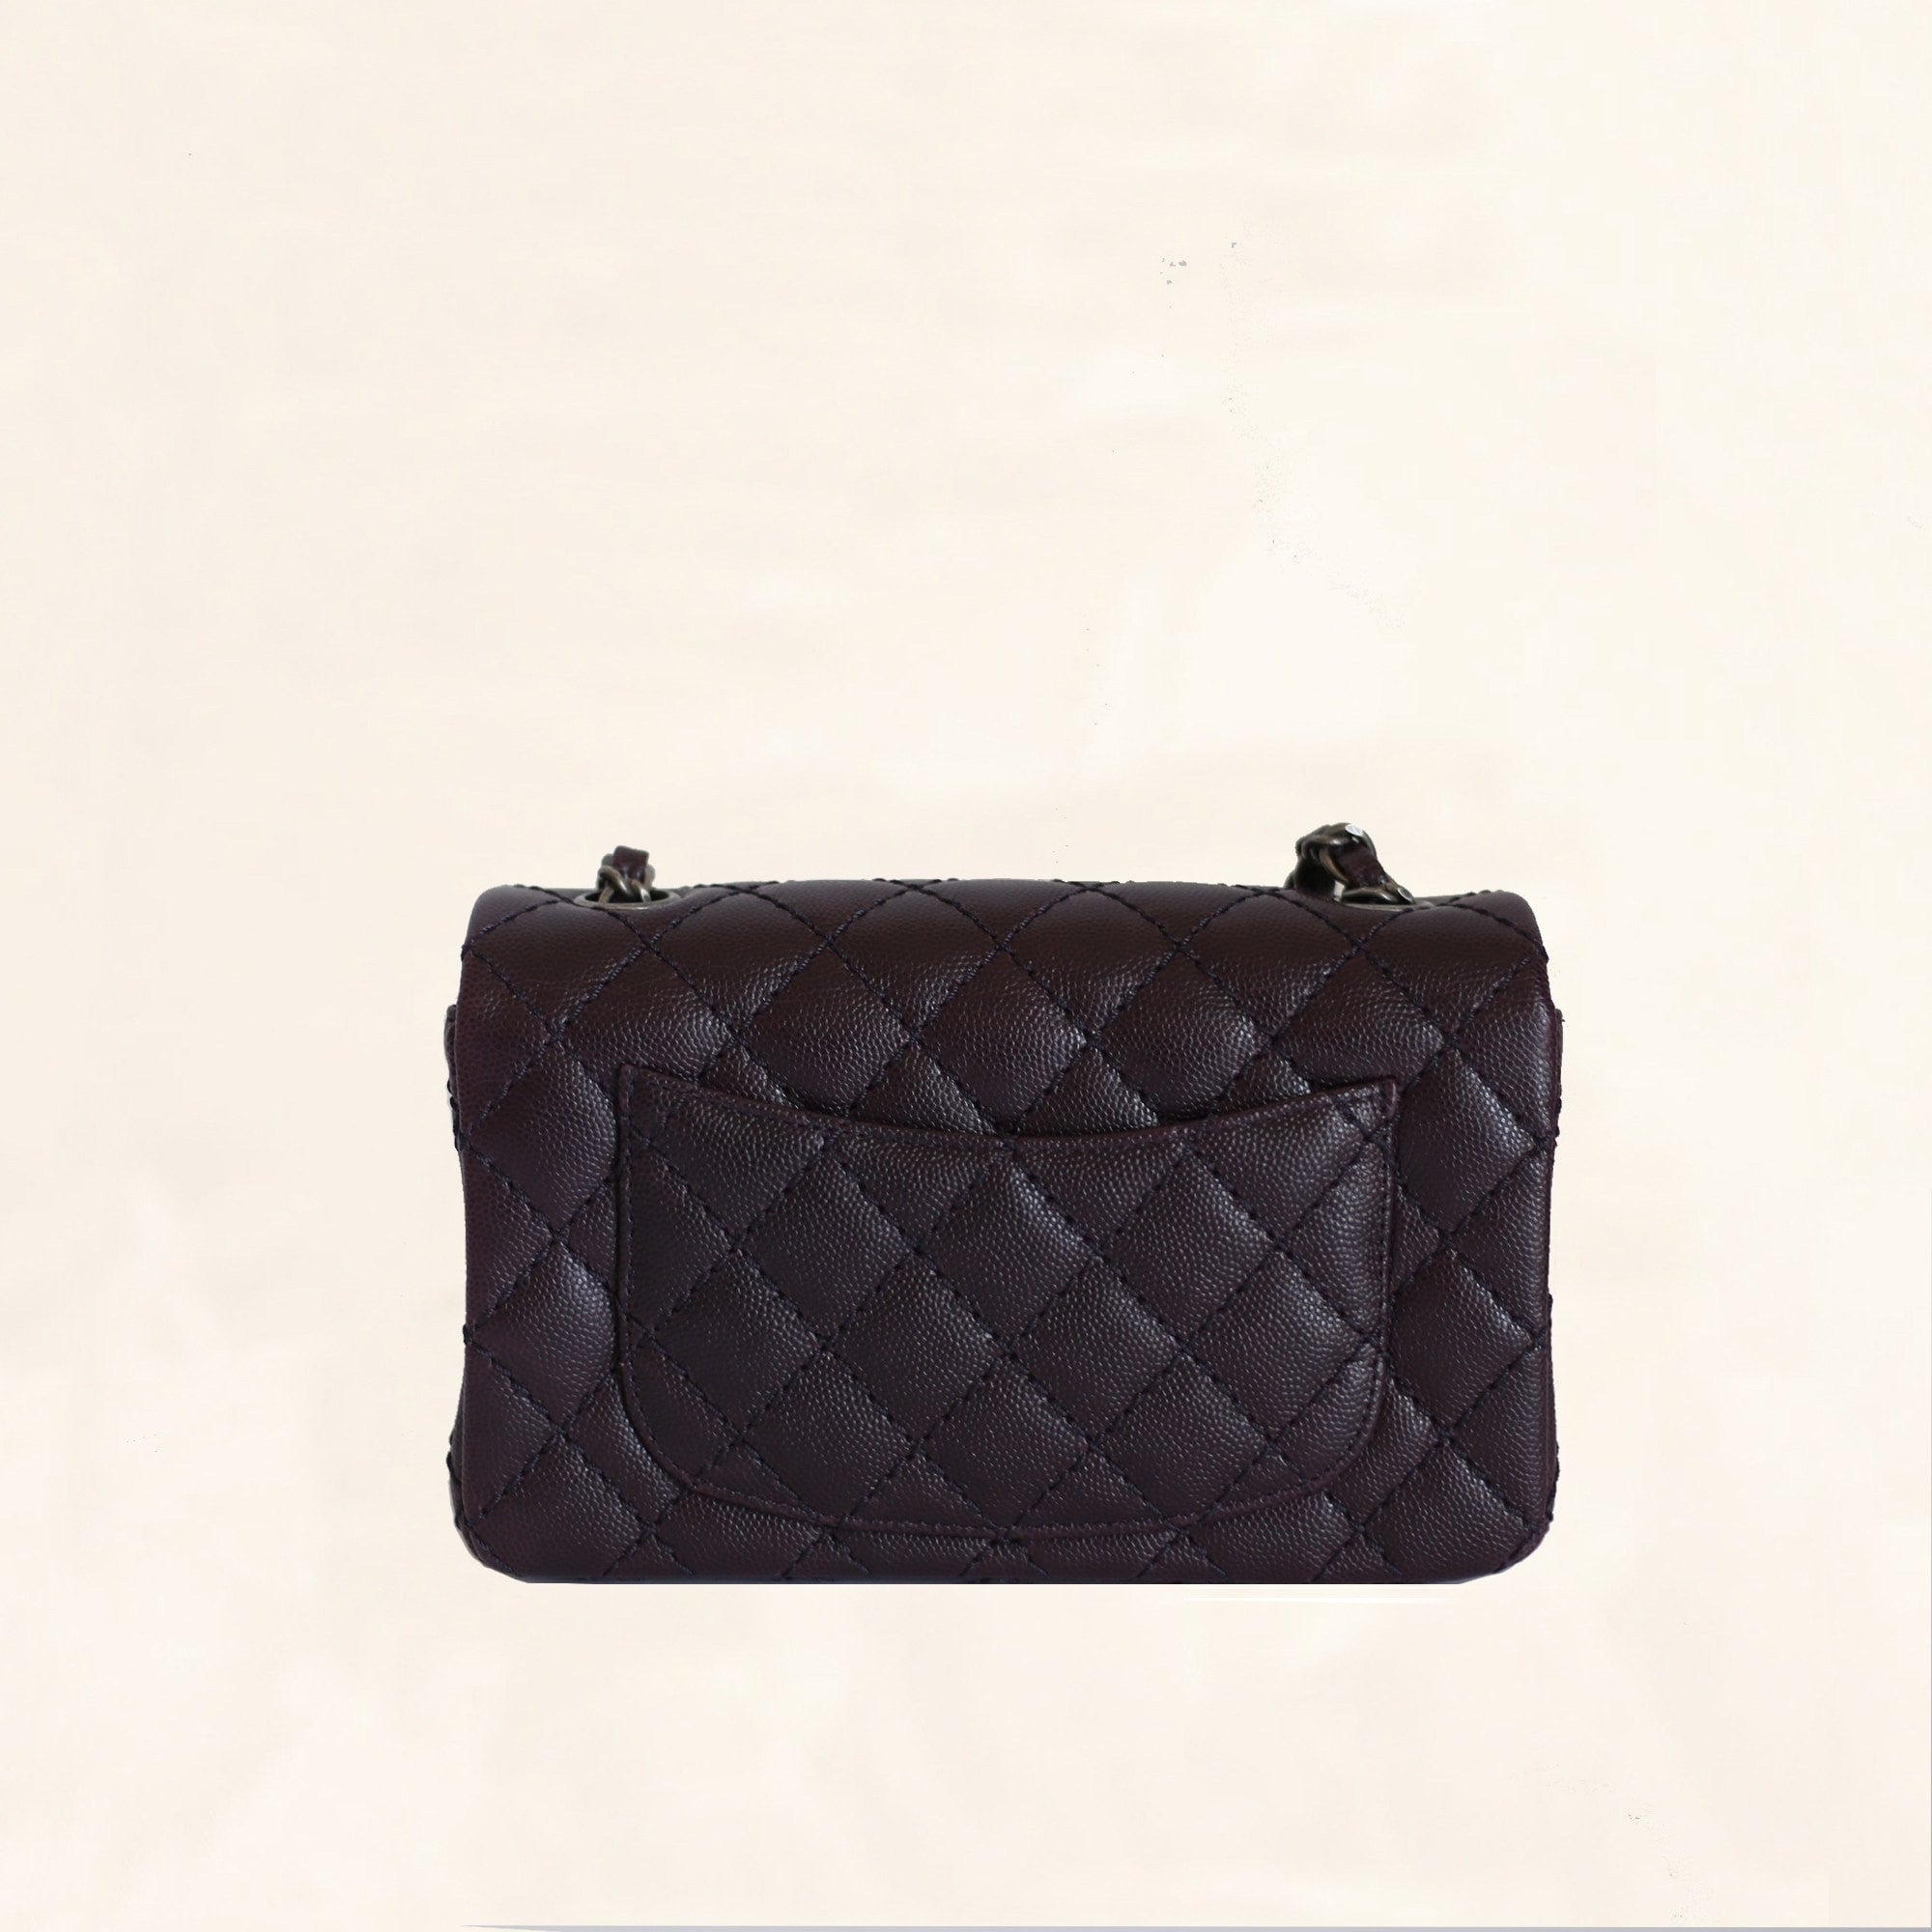 Chanel Reveal: Yes Please, I Would Love a Classic Flap from 22A